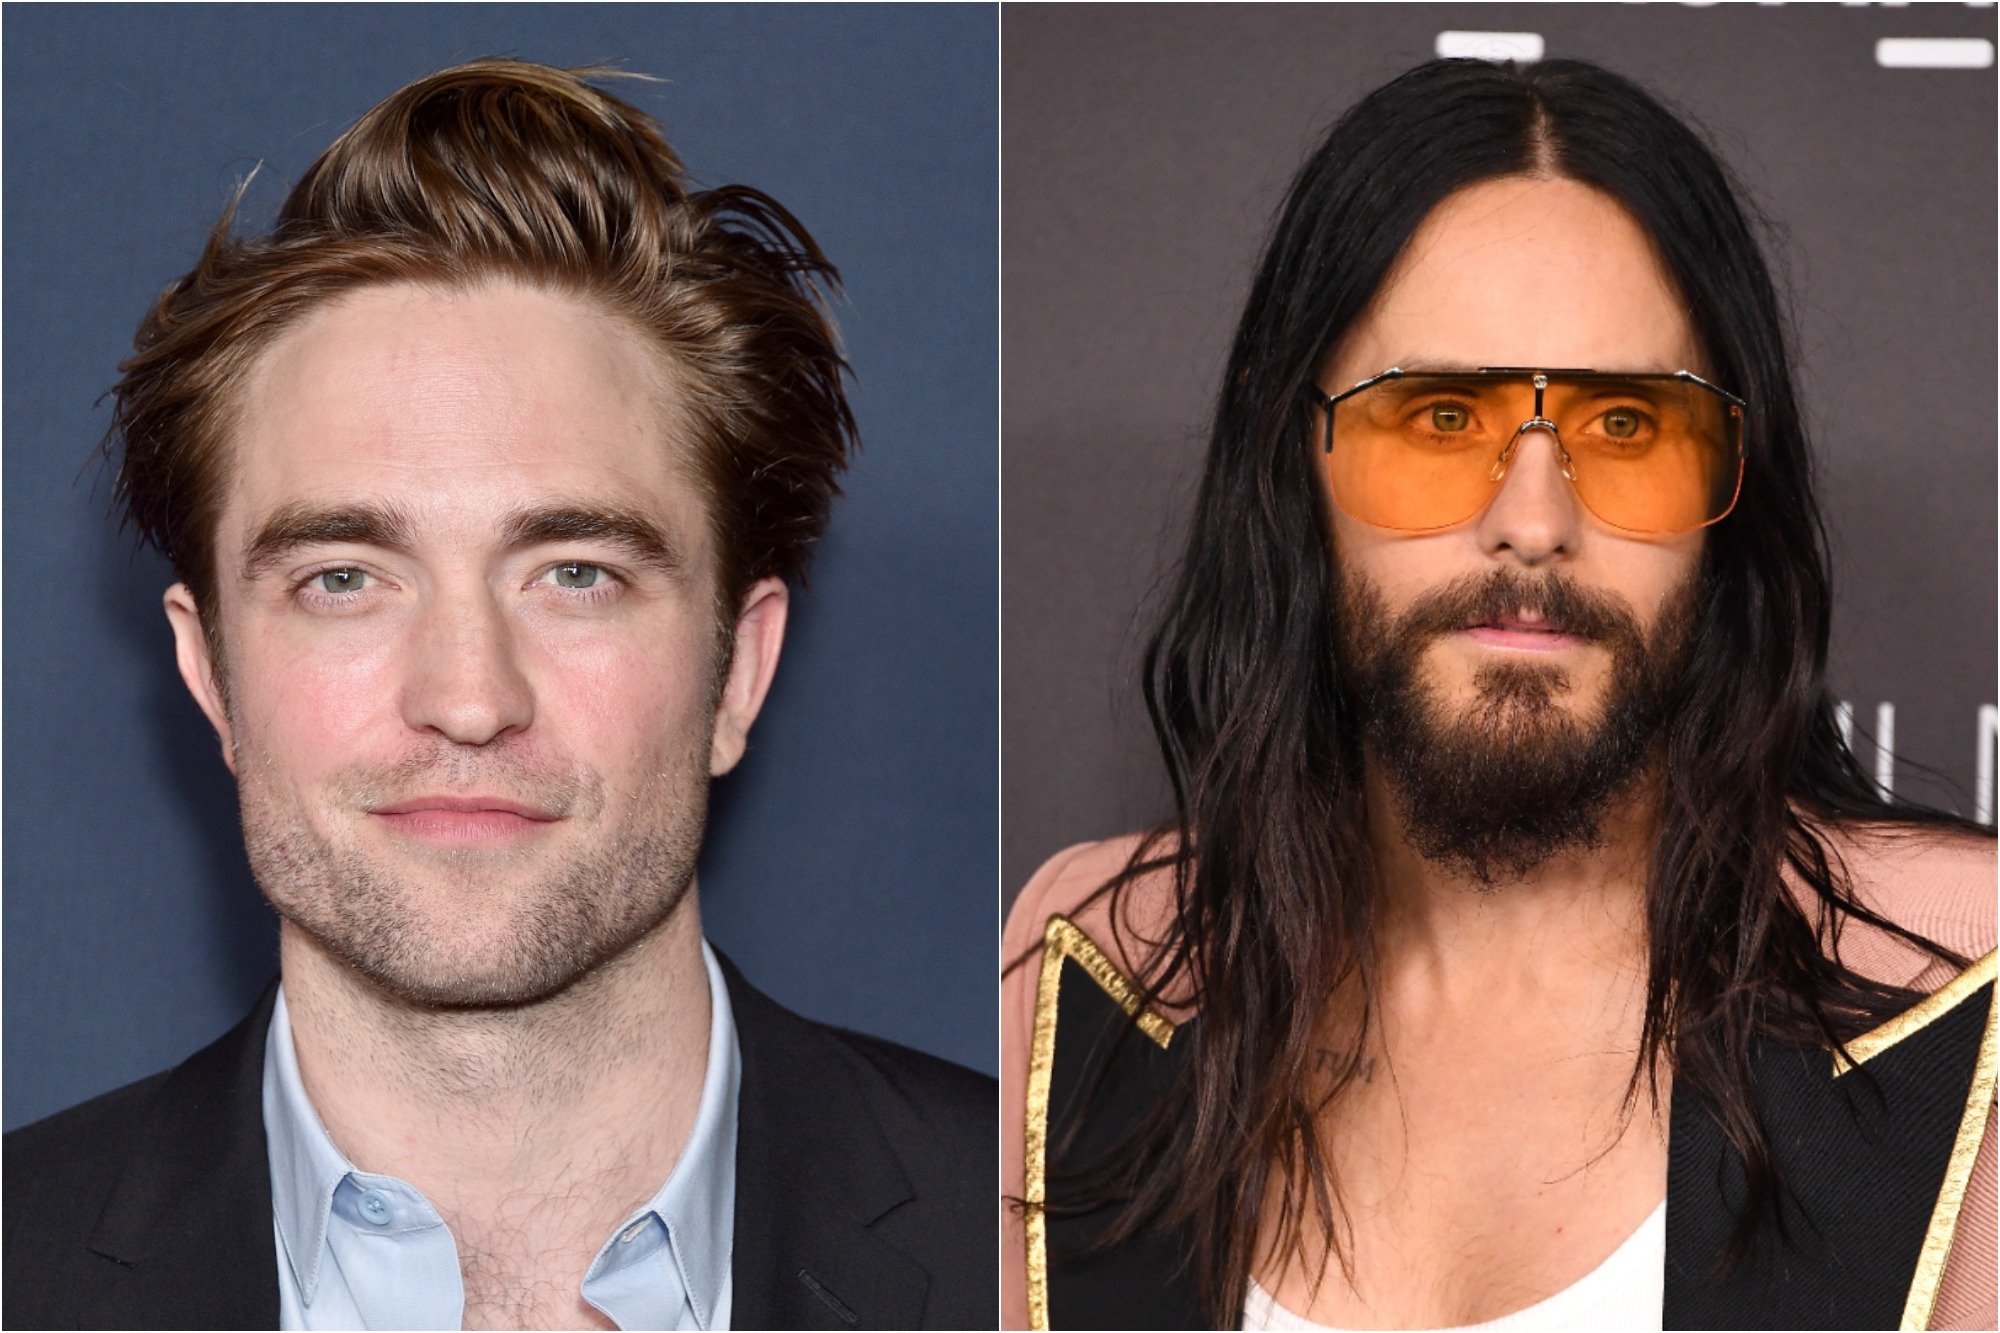 Robert Pattinson at the Go Campaign's 13th Annual Go Gala at NeueHouse Hollywood on Nov. 16, 2019 / Jared Leto at the LACMA Art + Film Gala Presented By Gucci at LACMA on Nov. 02, 2019.